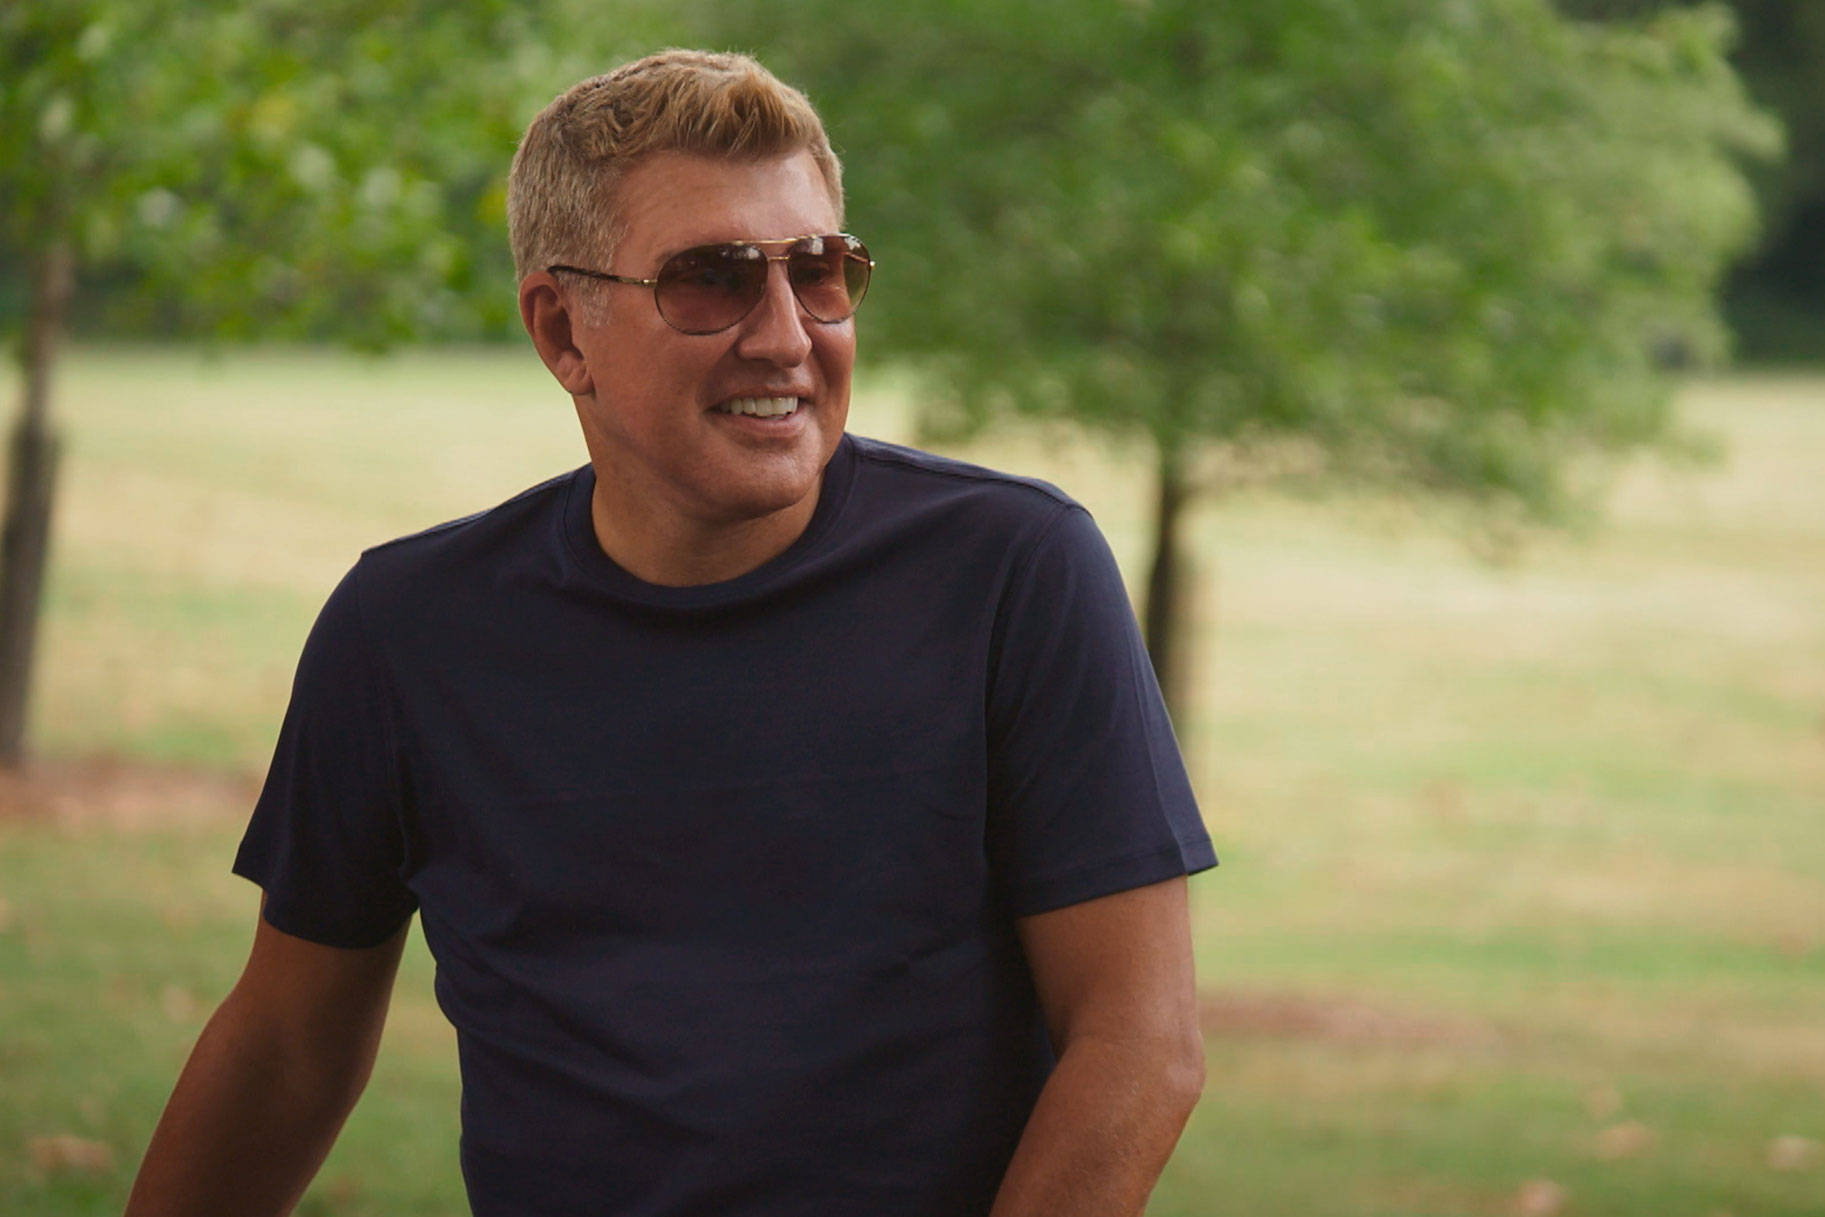 Todd Chrisley wearing sunglasses and smiling